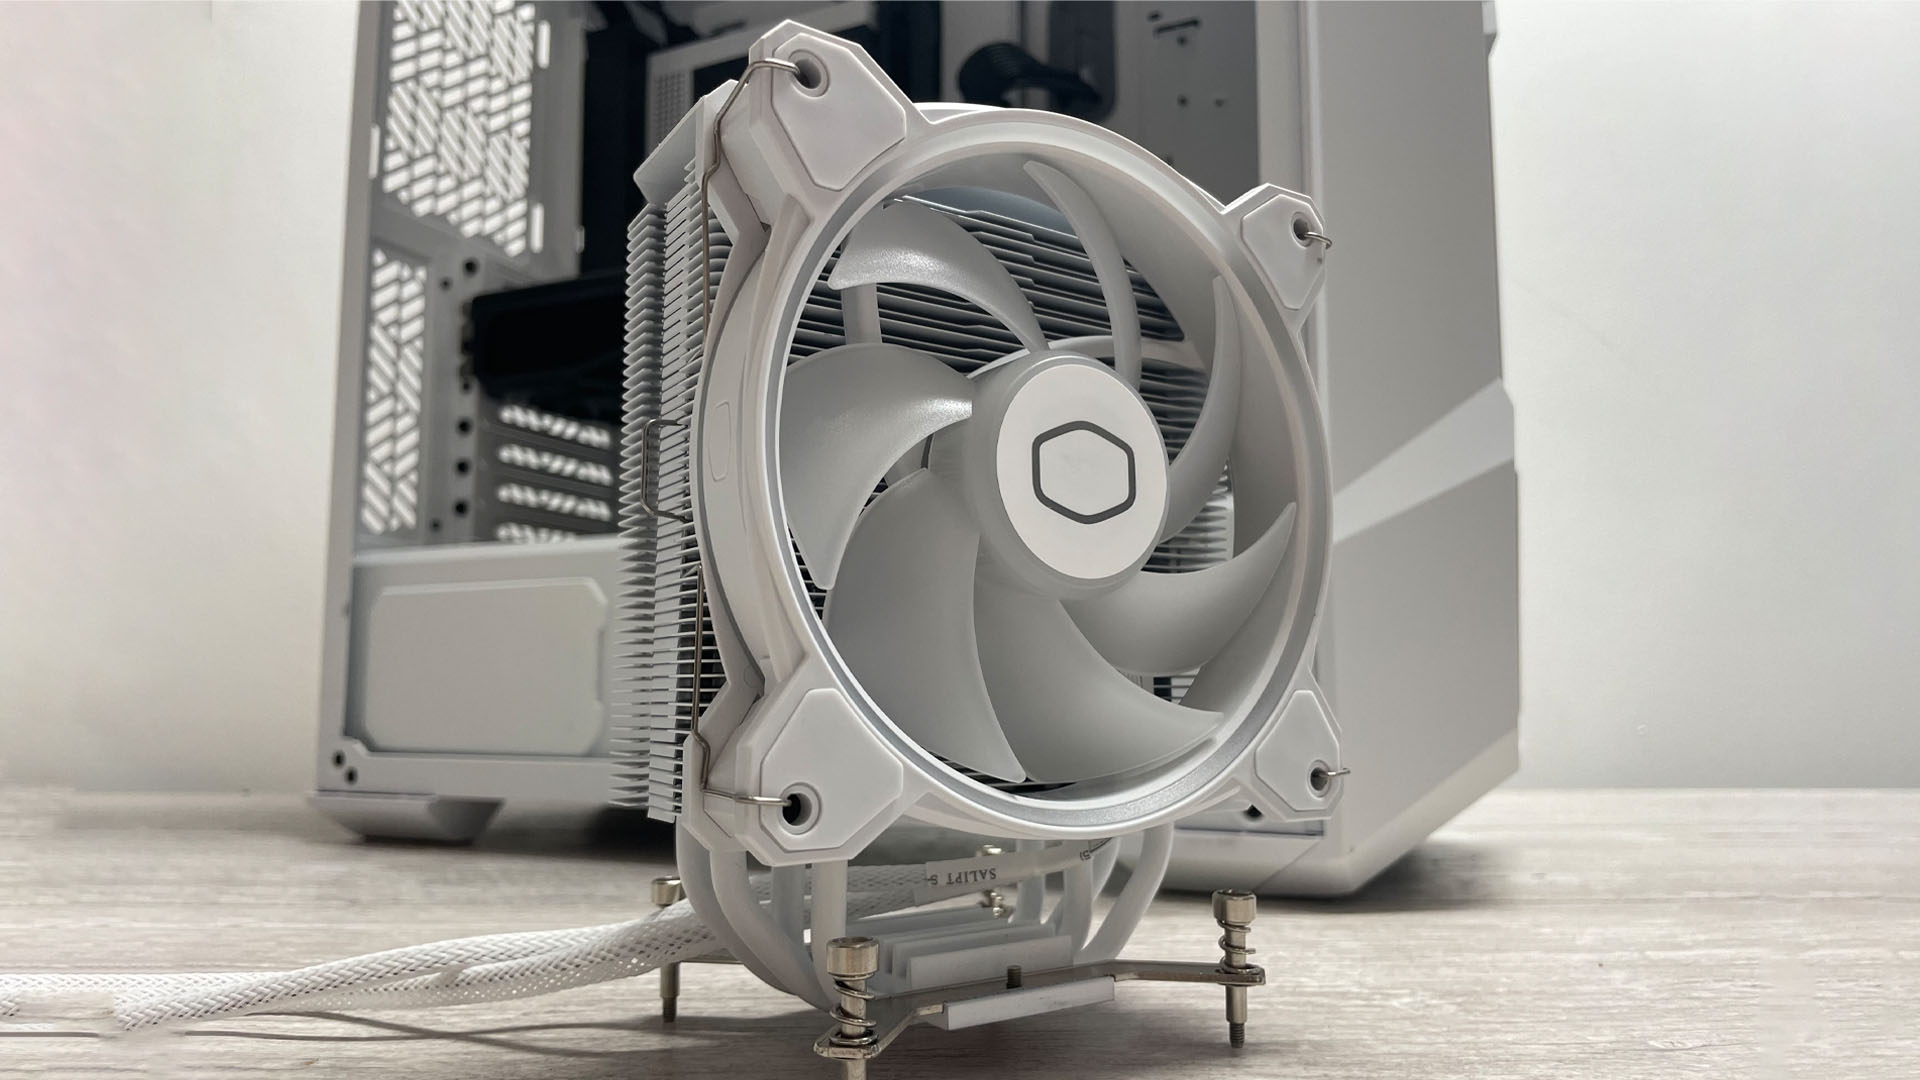 Cooler Master Hyper 212 Halo White review image showing it out of a PC case.